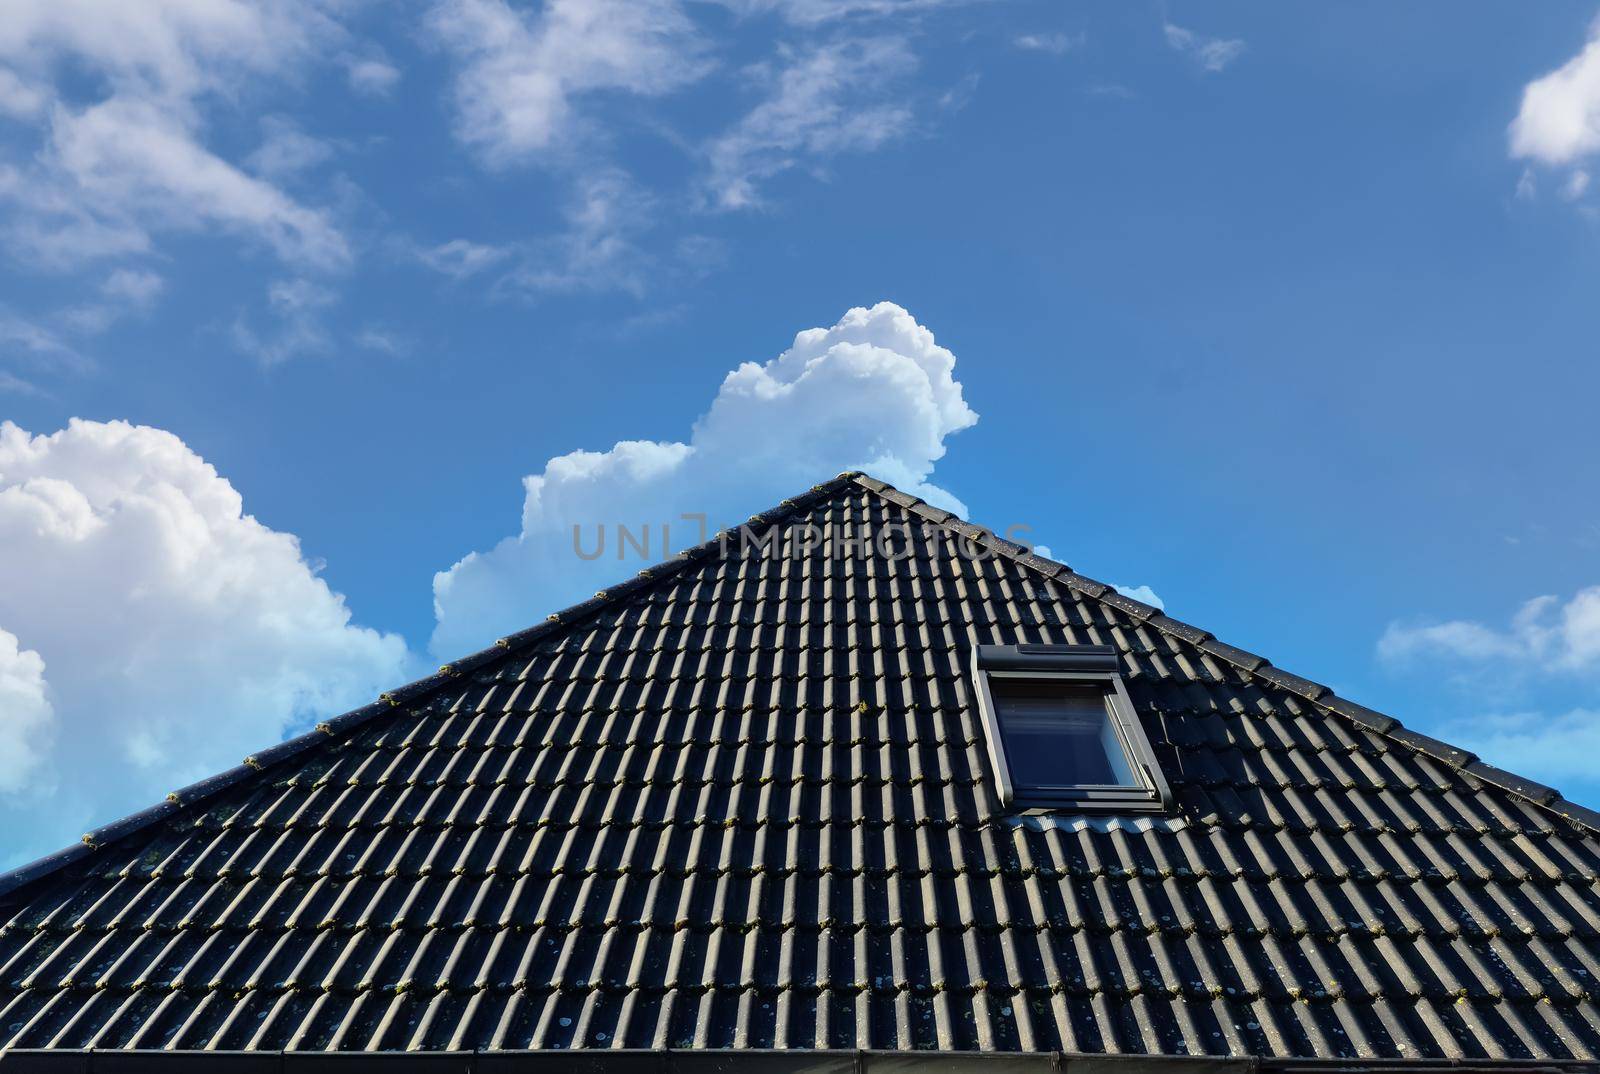 Open roof window in velux style with black roof tiles. by MP_foto71